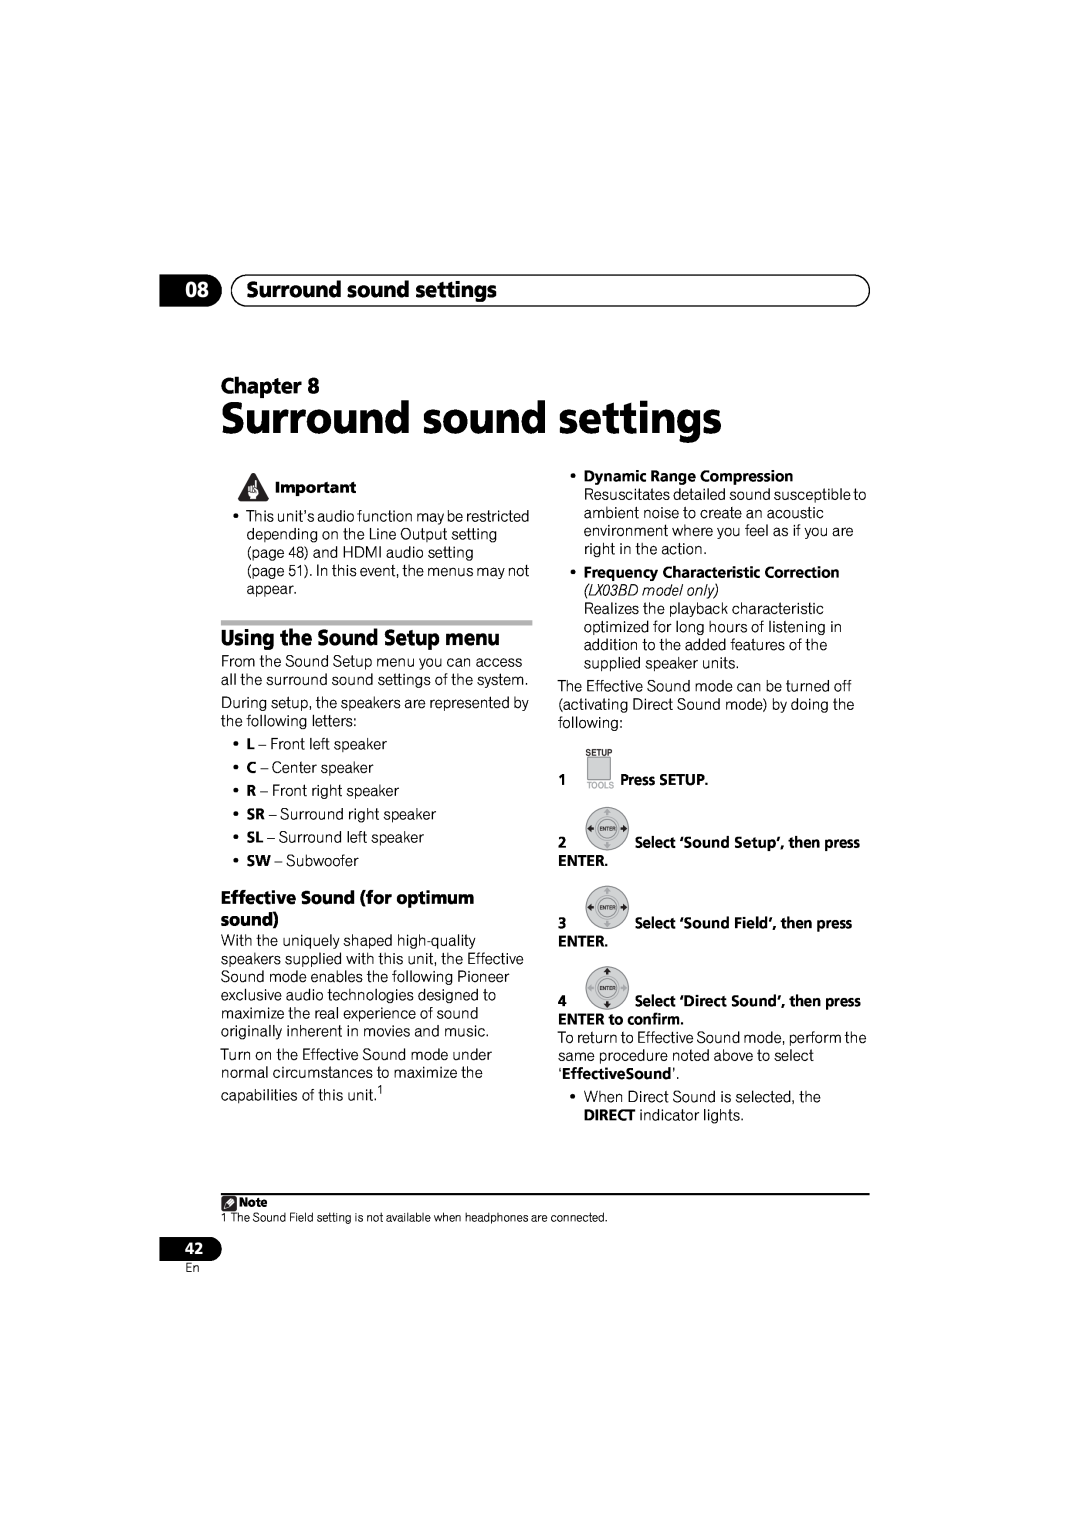 Pioneer SX-LX03 manual 08Surround sound settings Chapter, Using the Sound Setup menu, Effective Sound for optimum sound 